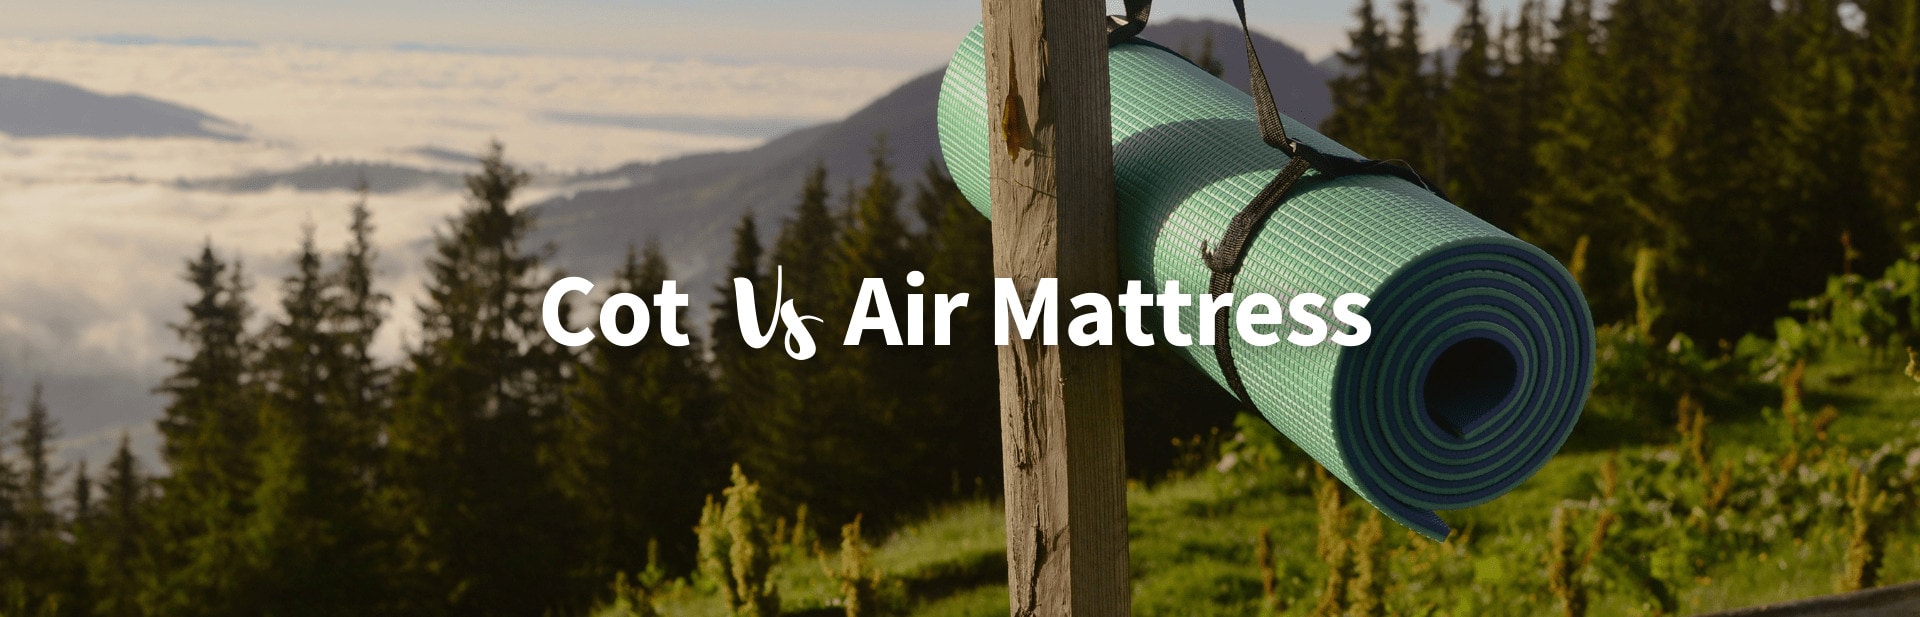 Cot vs. Air Mattress: Which One’s Right For Your Next Camping Trip?